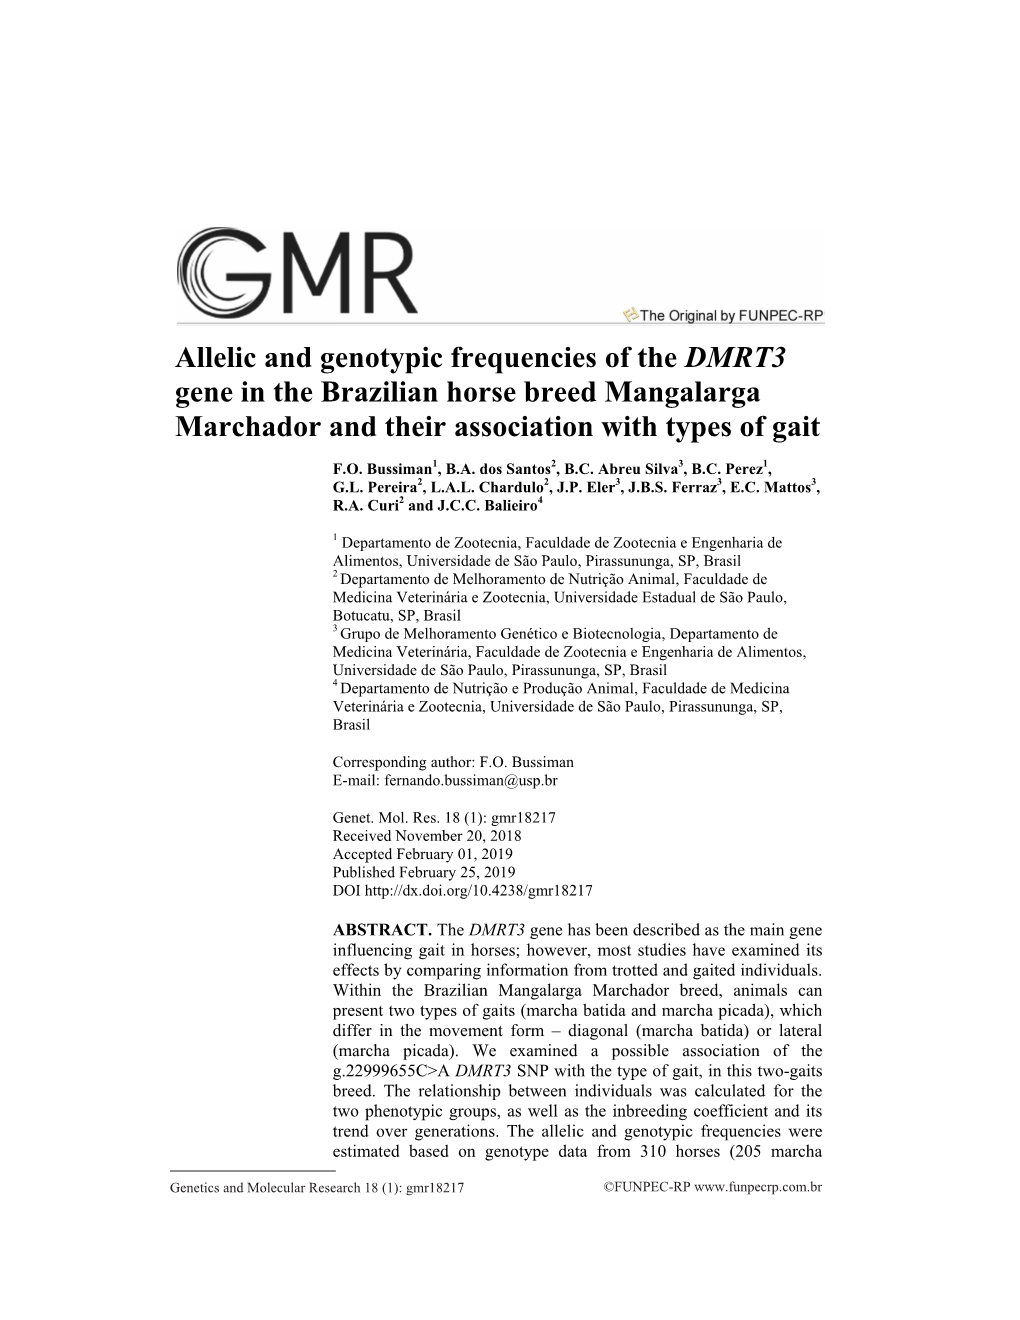 Allelic and Genotypic Frequencies of the DMRT3 Gene in the Brazilian Horse Breed Mangalarga Marchador and Their Association with Types of Gait